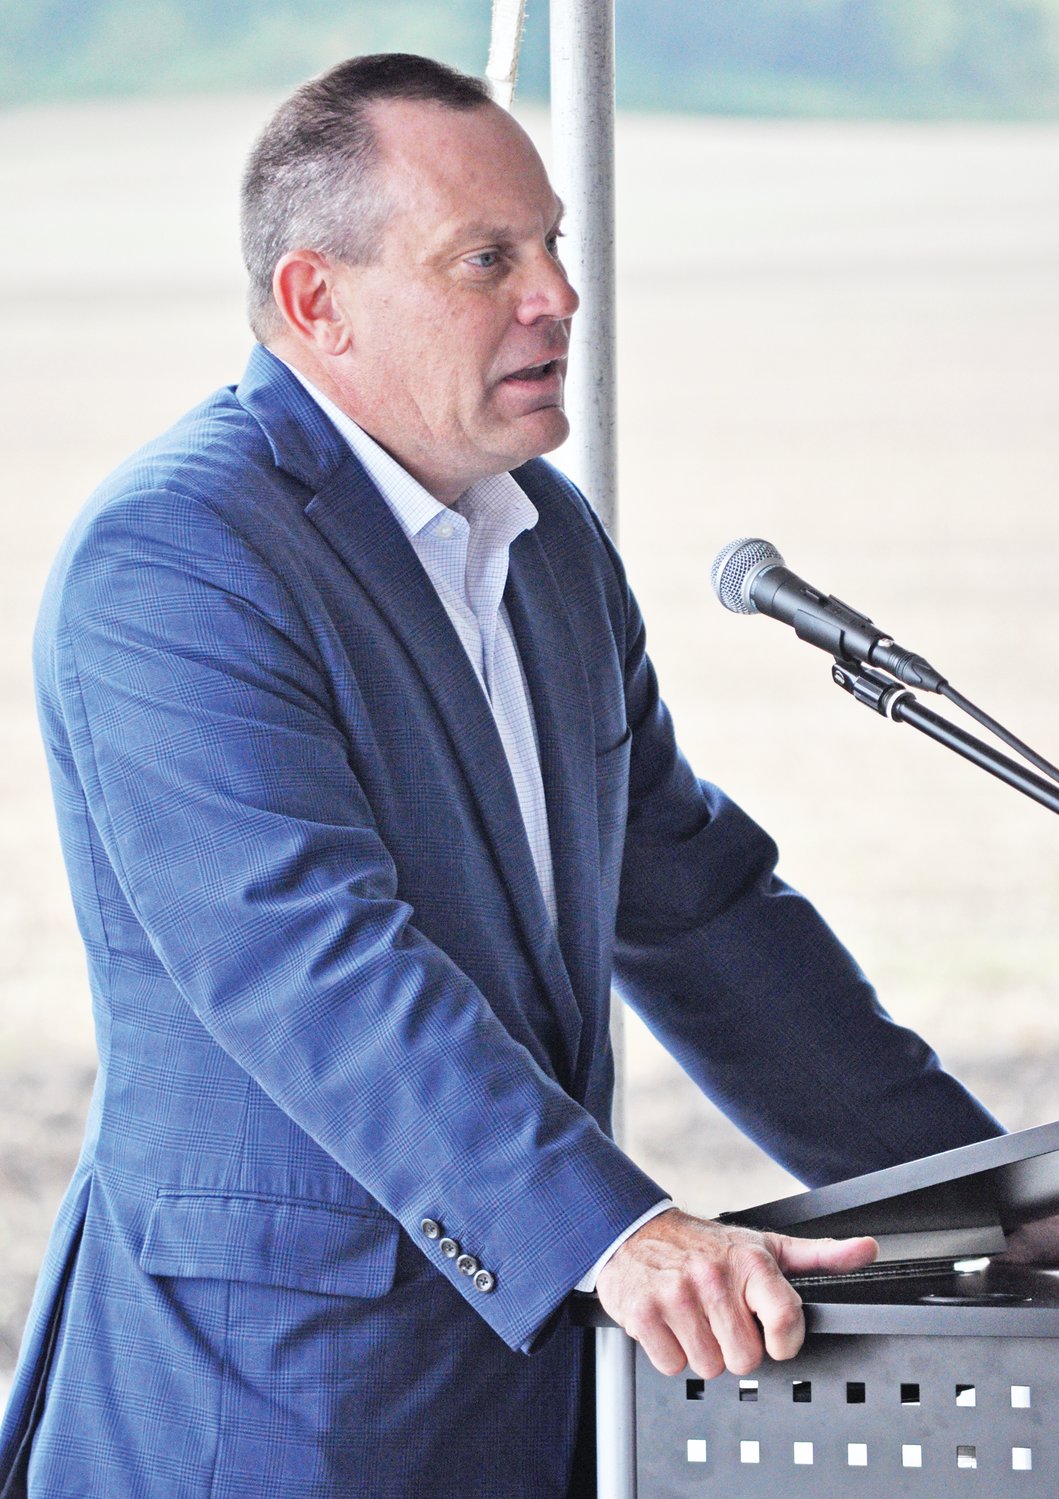 Cliff Buster, CEO North America of Tempur Sealy International, speaks at a groundbreaking ceremony for the Tempur Sealy plant on Thursday.